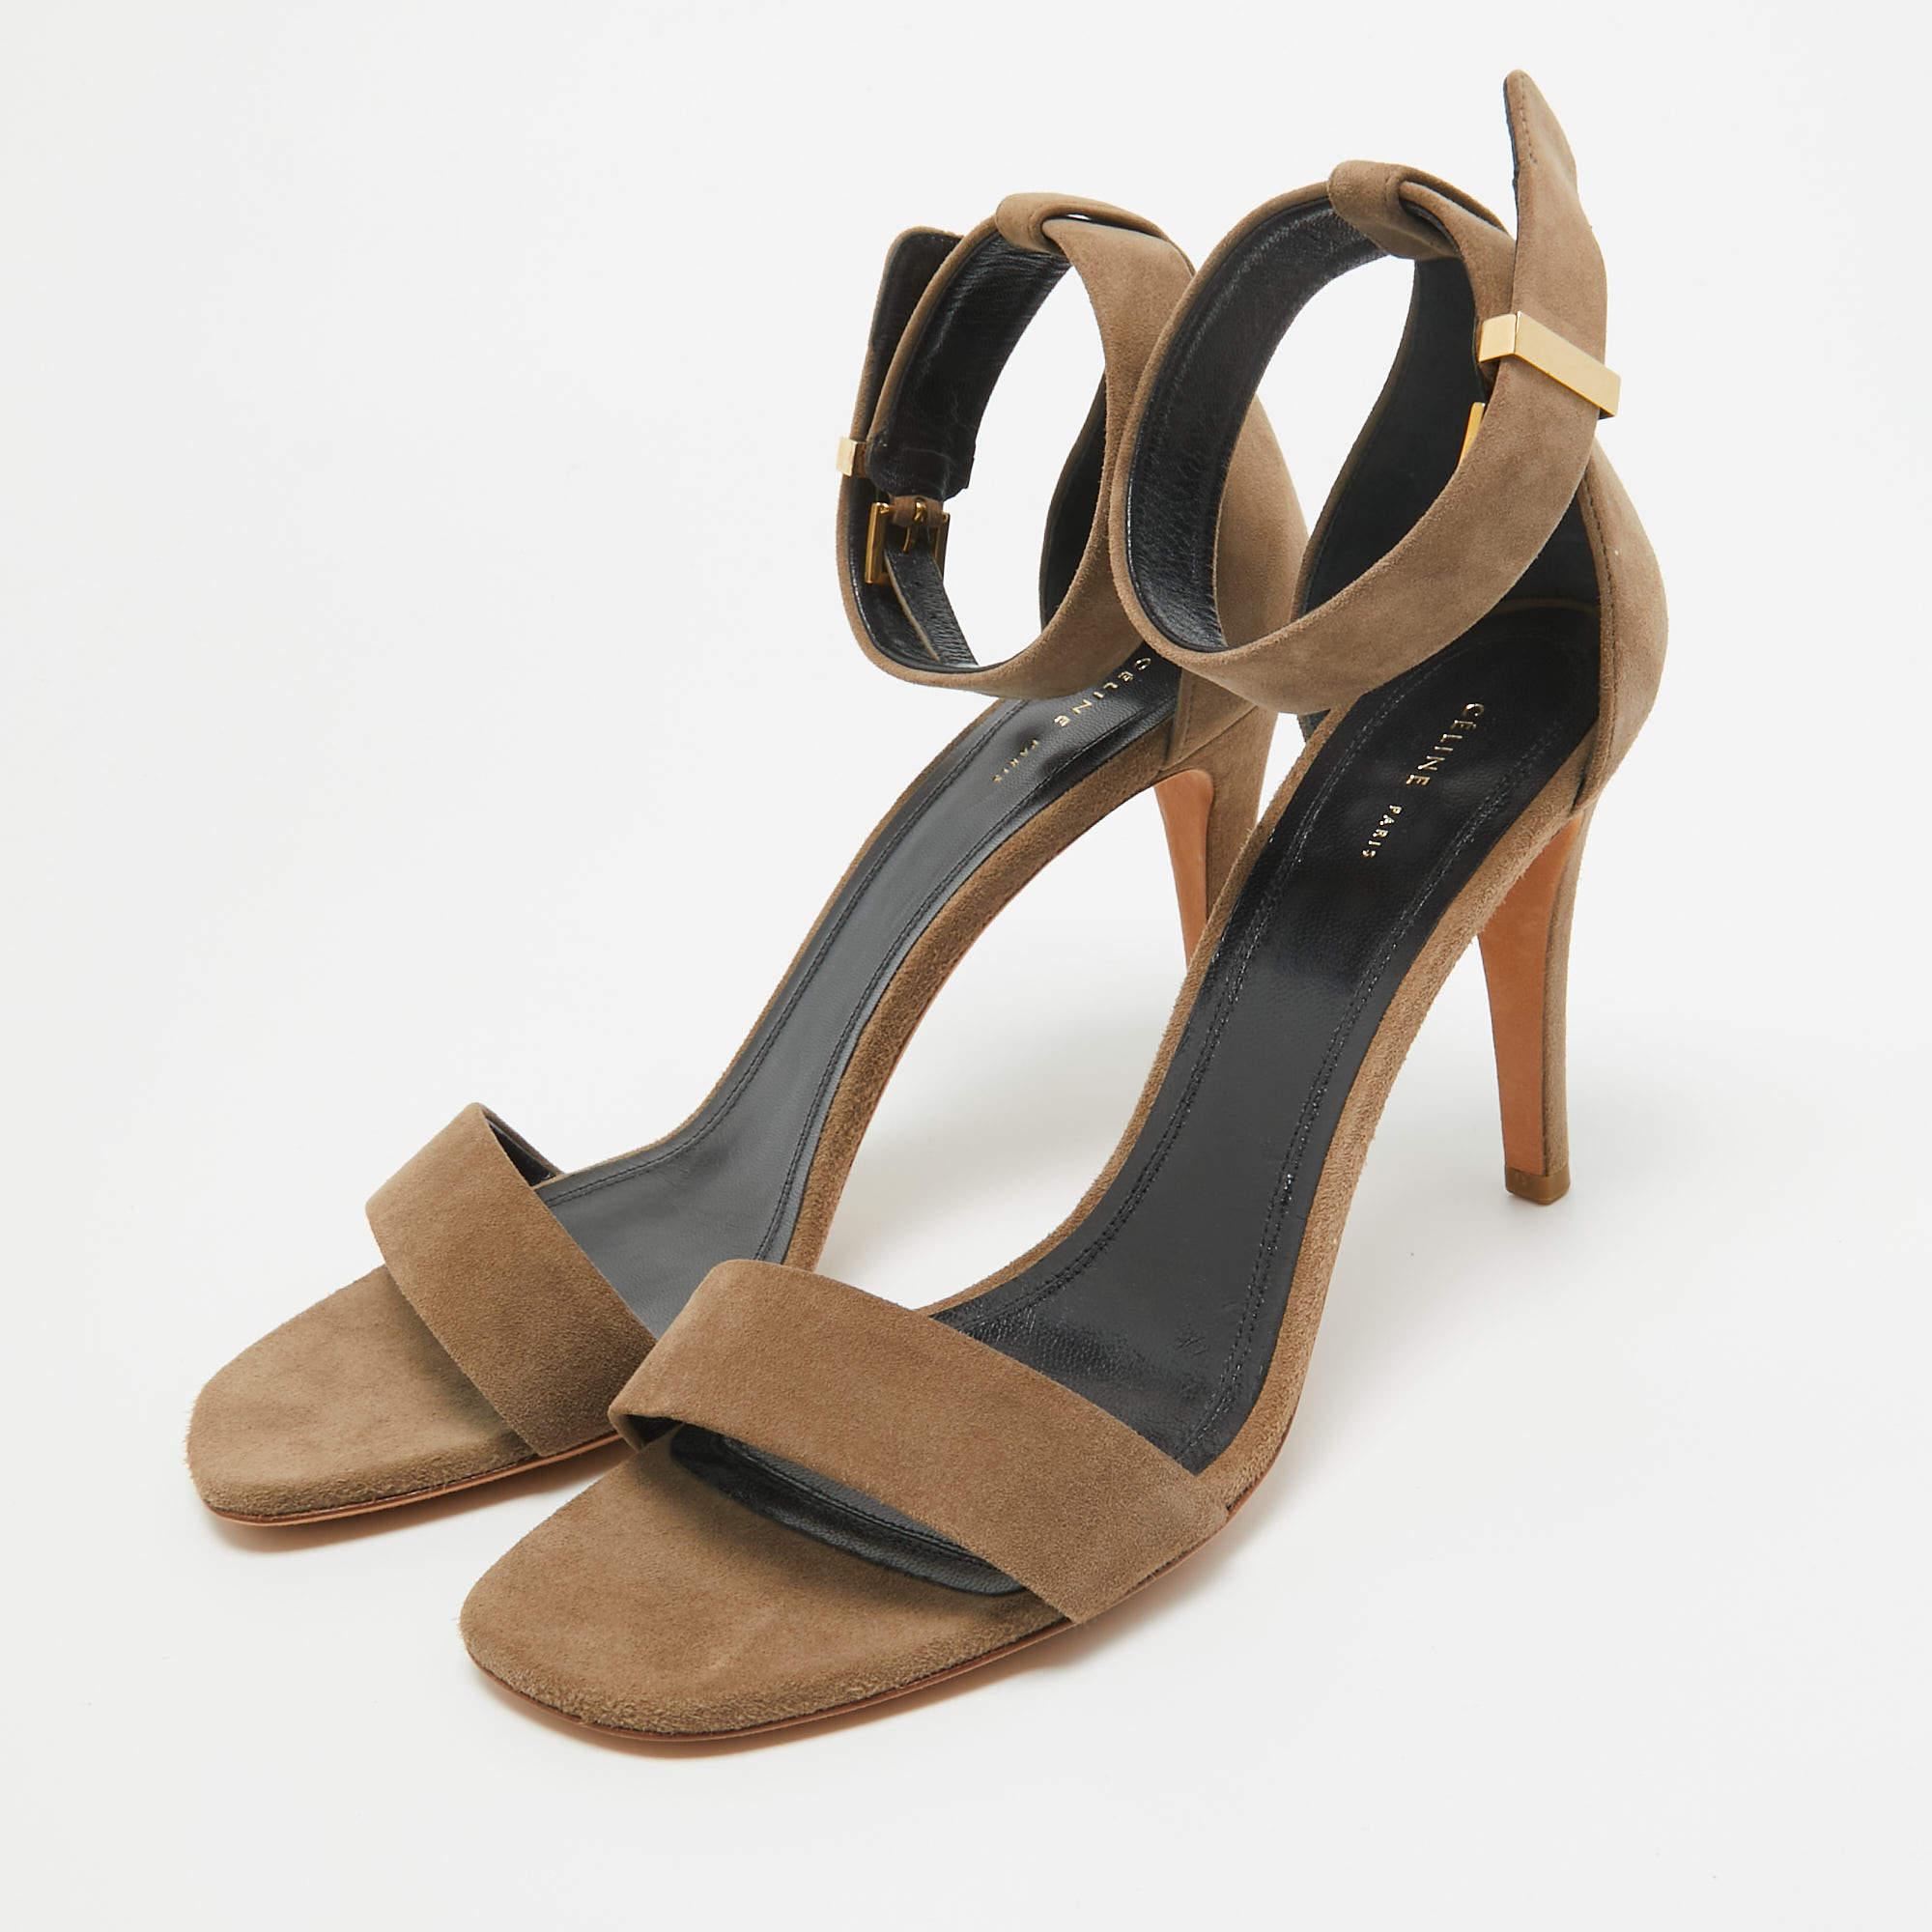 Discover footwear elegance with these Celine suede heels. Meticulously designed, these heels marry fashion and comfort, ensuring you shine in every setting.

